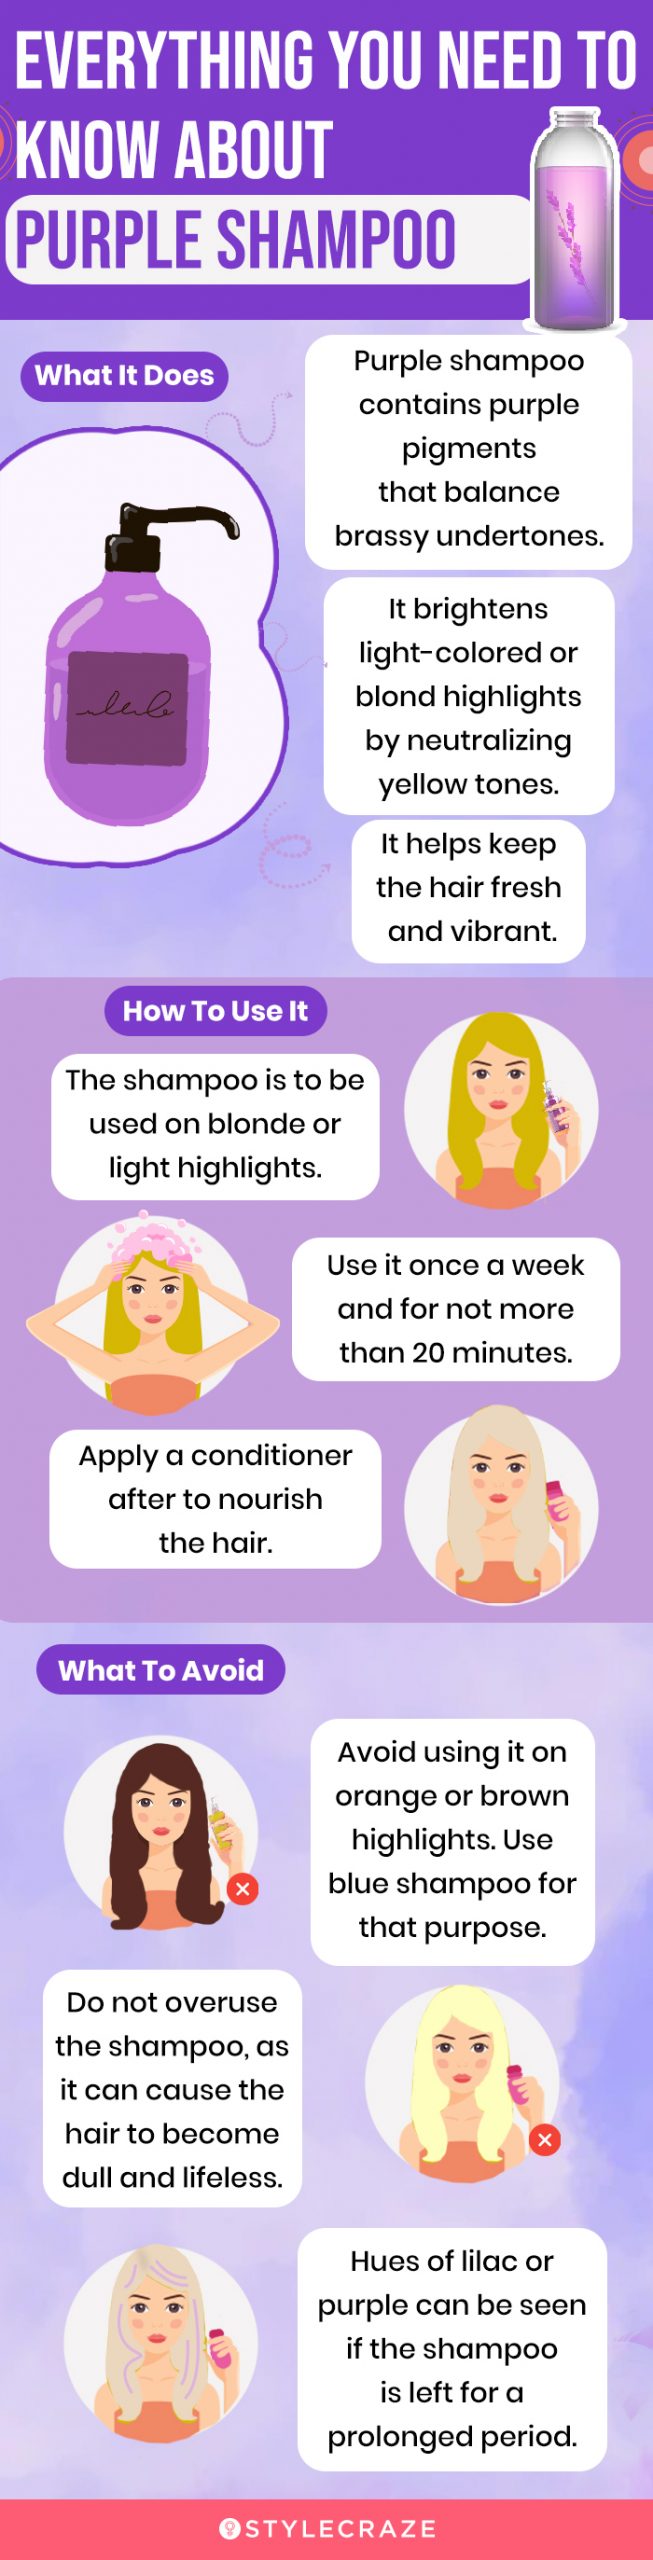 everything you need to know about purple shampoo (infographic)